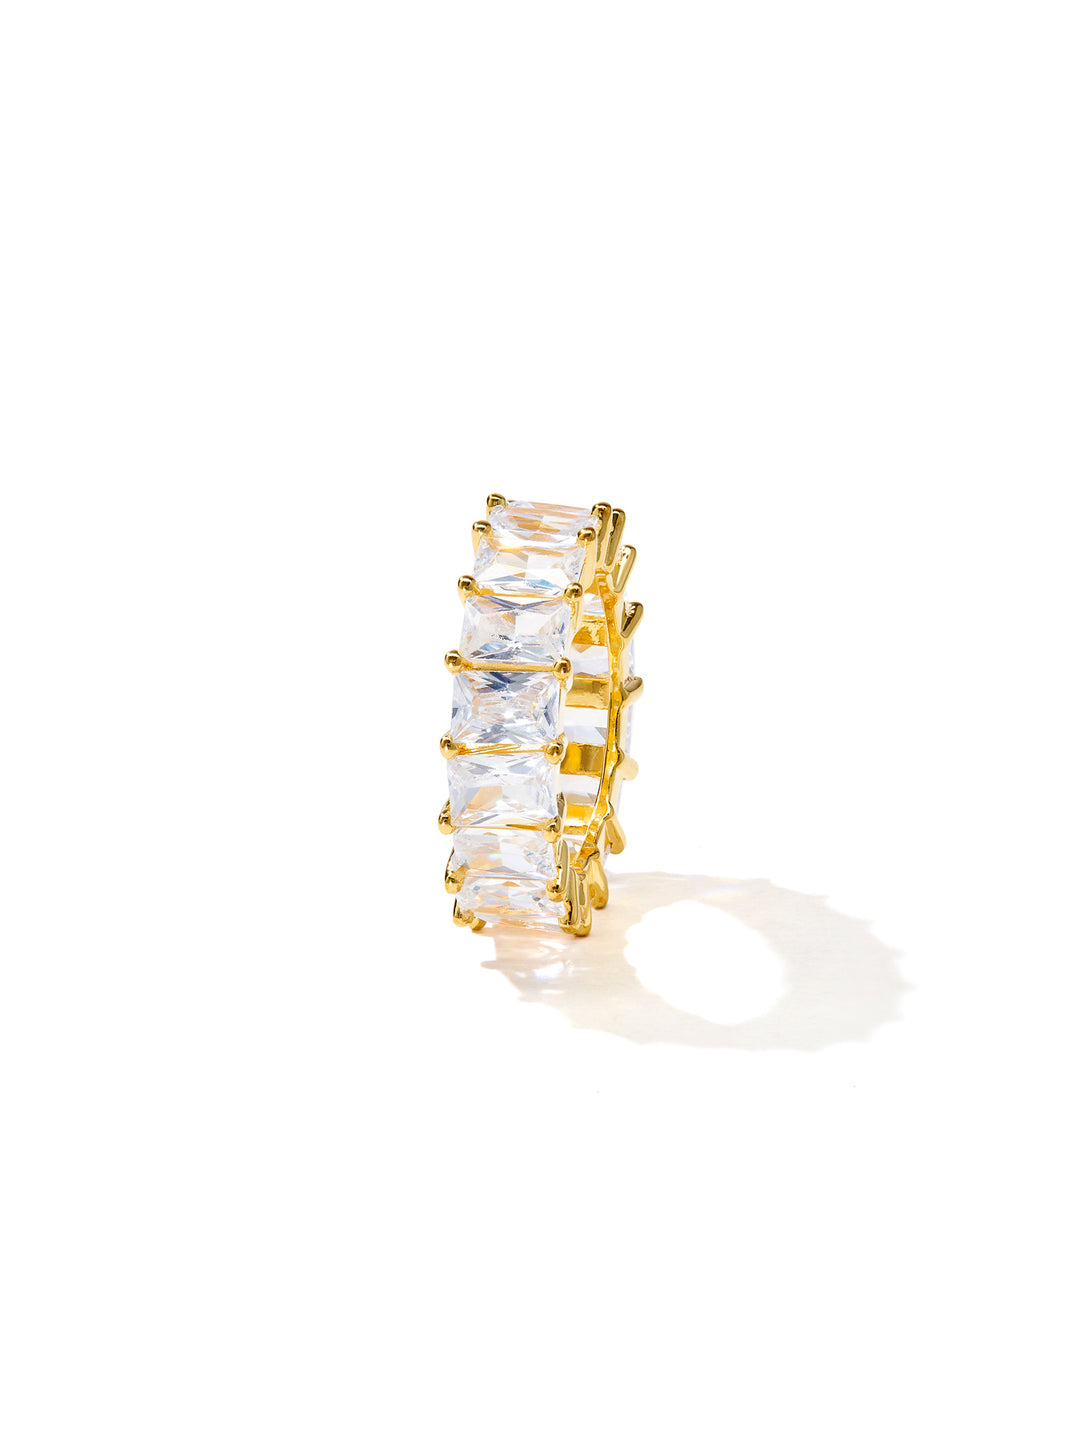 SET - Two STATEMENT Rings • Color: White Gold and 18K Yellow Gold